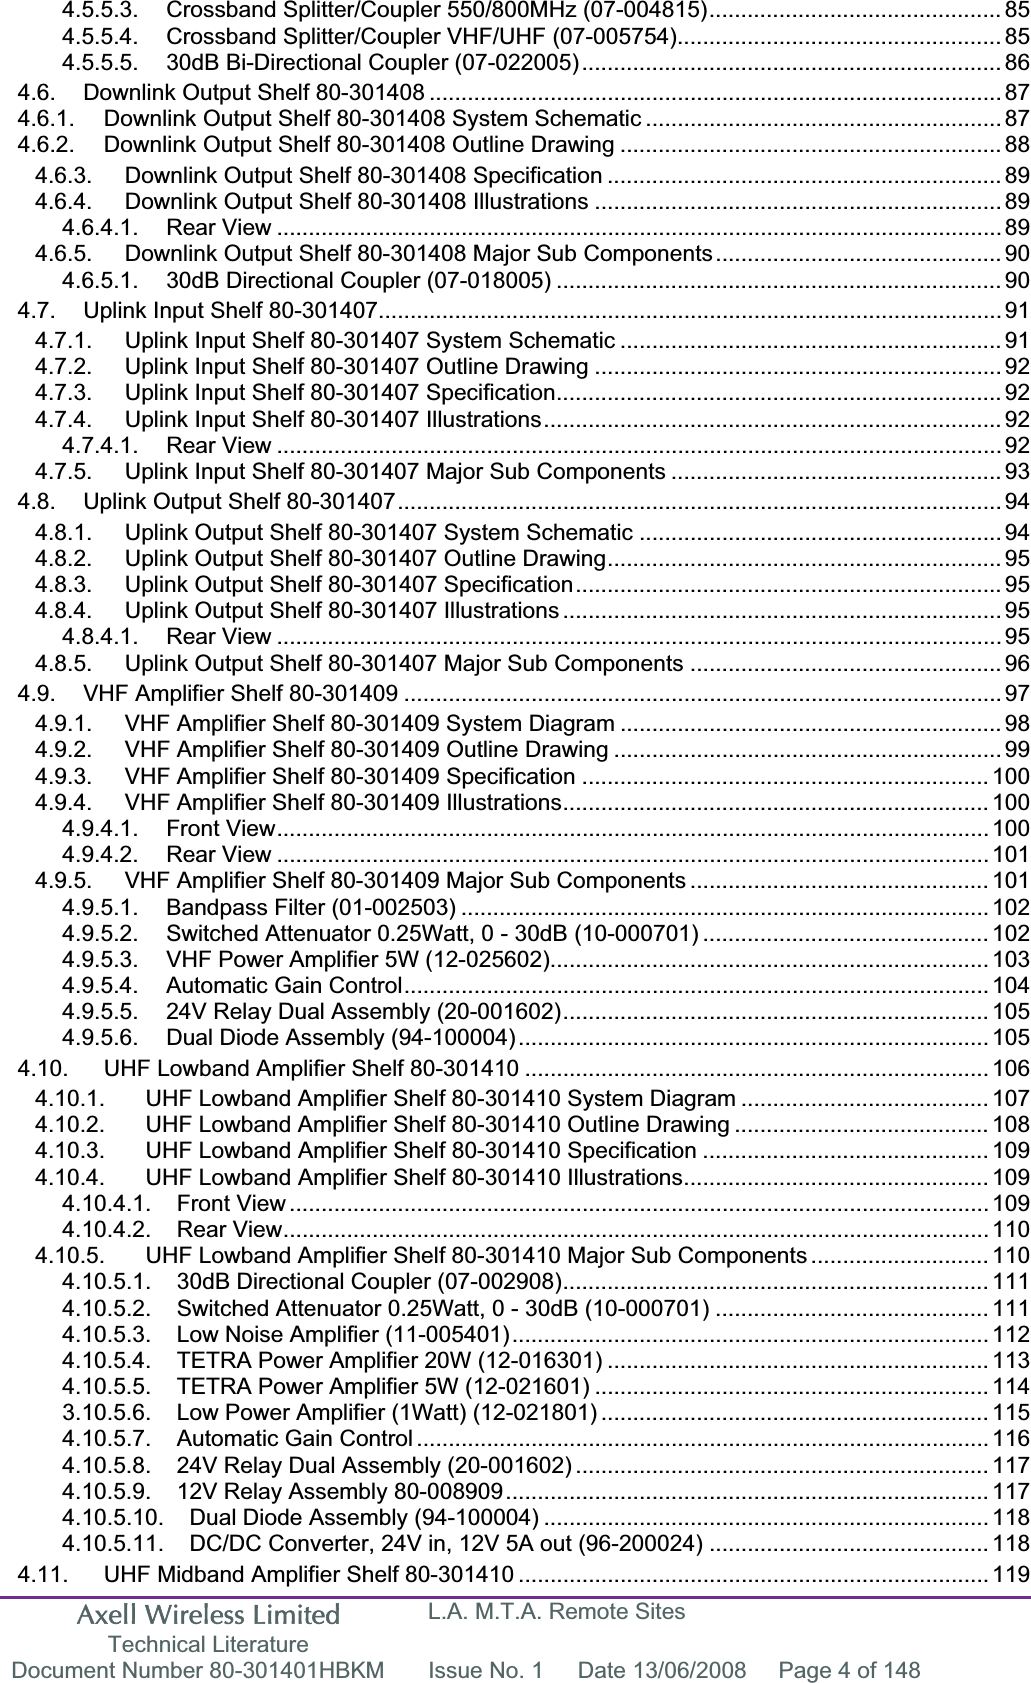 Axell Wireless Limited Technical Literature L.A. M.T.A. Remote Sites Document Number 80-301401HBKM  Issue No. 1  Date 13/06/2008  Page 4 of 148 4.5.5.3. Crossband Splitter/Coupler 550/800MHz (07-004815).............................................. 854.5.5.4. Crossband Splitter/Coupler VHF/UHF (07-005754)................................................... 854.5.5.5. 30dB Bi-Directional Coupler (07-022005).................................................................. 864.6. Downlink Output Shelf 80-301408 .......................................................................................... 874.6.1. Downlink Output Shelf 80-301408 System Schematic ........................................................ 874.6.2. Downlink Output Shelf 80-301408 Outline Drawing ............................................................ 884.6.3. Downlink Output Shelf 80-301408 Specification .............................................................. 894.6.4. Downlink Output Shelf 80-301408 Illustrations ................................................................ 894.6.4.1. Rear View .................................................................................................................. 894.6.5. Downlink Output Shelf 80-301408 Major Sub Components............................................. 904.6.5.1. 30dB Directional Coupler (07-018005) ...................................................................... 904.7. Uplink Input Shelf 80-301407.................................................................................................. 914.7.1. Uplink Input Shelf 80-301407 System Schematic ............................................................ 914.7.2. Uplink Input Shelf 80-301407 Outline Drawing ................................................................ 924.7.3. Uplink Input Shelf 80-301407 Specification...................................................................... 924.7.4. Uplink Input Shelf 80-301407 Illustrations........................................................................ 924.7.4.1. Rear View .................................................................................................................. 924.7.5. Uplink Input Shelf 80-301407 Major Sub Components .................................................... 934.8. Uplink Output Shelf 80-301407...............................................................................................944.8.1. Uplink Output Shelf 80-301407 System Schematic ......................................................... 944.8.2. Uplink Output Shelf 80-301407 Outline Drawing.............................................................. 954.8.3. Uplink Output Shelf 80-301407 Specification................................................................... 954.8.4. Uplink Output Shelf 80-301407 Illustrations ..................................................................... 954.8.4.1. Rear View .................................................................................................................. 954.8.5. Uplink Output Shelf 80-301407 Major Sub Components ................................................. 964.9. VHF Amplifier Shelf 80-301409 .............................................................................................. 974.9.1. VHF Amplifier Shelf 80-301409 System Diagram ............................................................ 984.9.2. VHF Amplifier Shelf 80-301409 Outline Drawing ............................................................. 994.9.3. VHF Amplifier Shelf 80-301409 Specification ................................................................ 1004.9.4. VHF Amplifier Shelf 80-301409 Illustrations................................................................... 1004.9.4.1. Front View................................................................................................................ 1004.9.4.2. Rear View ................................................................................................................ 1014.9.5. VHF Amplifier Shelf 80-301409 Major Sub Components ............................................... 1014.9.5.1. Bandpass Filter (01-002503) ................................................................................... 1024.9.5.2. Switched Attenuator 0.25Watt, 0 - 30dB (10-000701) ............................................. 1024.9.5.3. VHF Power Amplifier 5W (12-025602)..................................................................... 1034.9.5.4. Automatic Gain Control............................................................................................ 1044.9.5.5. 24V Relay Dual Assembly (20-001602)................................................................... 1054.9.5.6. Dual Diode Assembly (94-100004).......................................................................... 1054.10. UHF Lowband Amplifier Shelf 80-301410 ......................................................................... 1064.10.1. UHF Lowband Amplifier Shelf 80-301410 System Diagram ....................................... 1074.10.2. UHF Lowband Amplifier Shelf 80-301410 Outline Drawing ........................................ 1084.10.3. UHF Lowband Amplifier Shelf 80-301410 Specification ............................................. 1094.10.4. UHF Lowband Amplifier Shelf 80-301410 Illustrations................................................ 1094.10.4.1. Front View .............................................................................................................. 1094.10.4.2. Rear View............................................................................................................... 1104.10.5. UHF Lowband Amplifier Shelf 80-301410 Major Sub Components ............................ 1104.10.5.1. 30dB Directional Coupler (07-002908)................................................................... 1114.10.5.2. Switched Attenuator 0.25Watt, 0 - 30dB (10-000701) ........................................... 1114.10.5.3. Low Noise Amplifier (11-005401)........................................................................... 1124.10.5.4. TETRA Power Amplifier 20W (12-016301) ............................................................ 1134.10.5.5. TETRA Power Amplifier 5W (12-021601) .............................................................. 1143.10.5.6. Low Power Amplifier (1Watt) (12-021801) ............................................................. 1154.10.5.7. Automatic Gain Control .......................................................................................... 1164.10.5.8. 24V Relay Dual Assembly (20-001602) ................................................................. 1174.10.5.9. 12V Relay Assembly 80-008909............................................................................ 1174.10.5.10. Dual Diode Assembly (94-100004) ...................................................................... 1184.10.5.11. DC/DC Converter, 24V in, 12V 5A out (96-200024) ............................................ 1184.11. UHF Midband Amplifier Shelf 80-301410 .......................................................................... 119